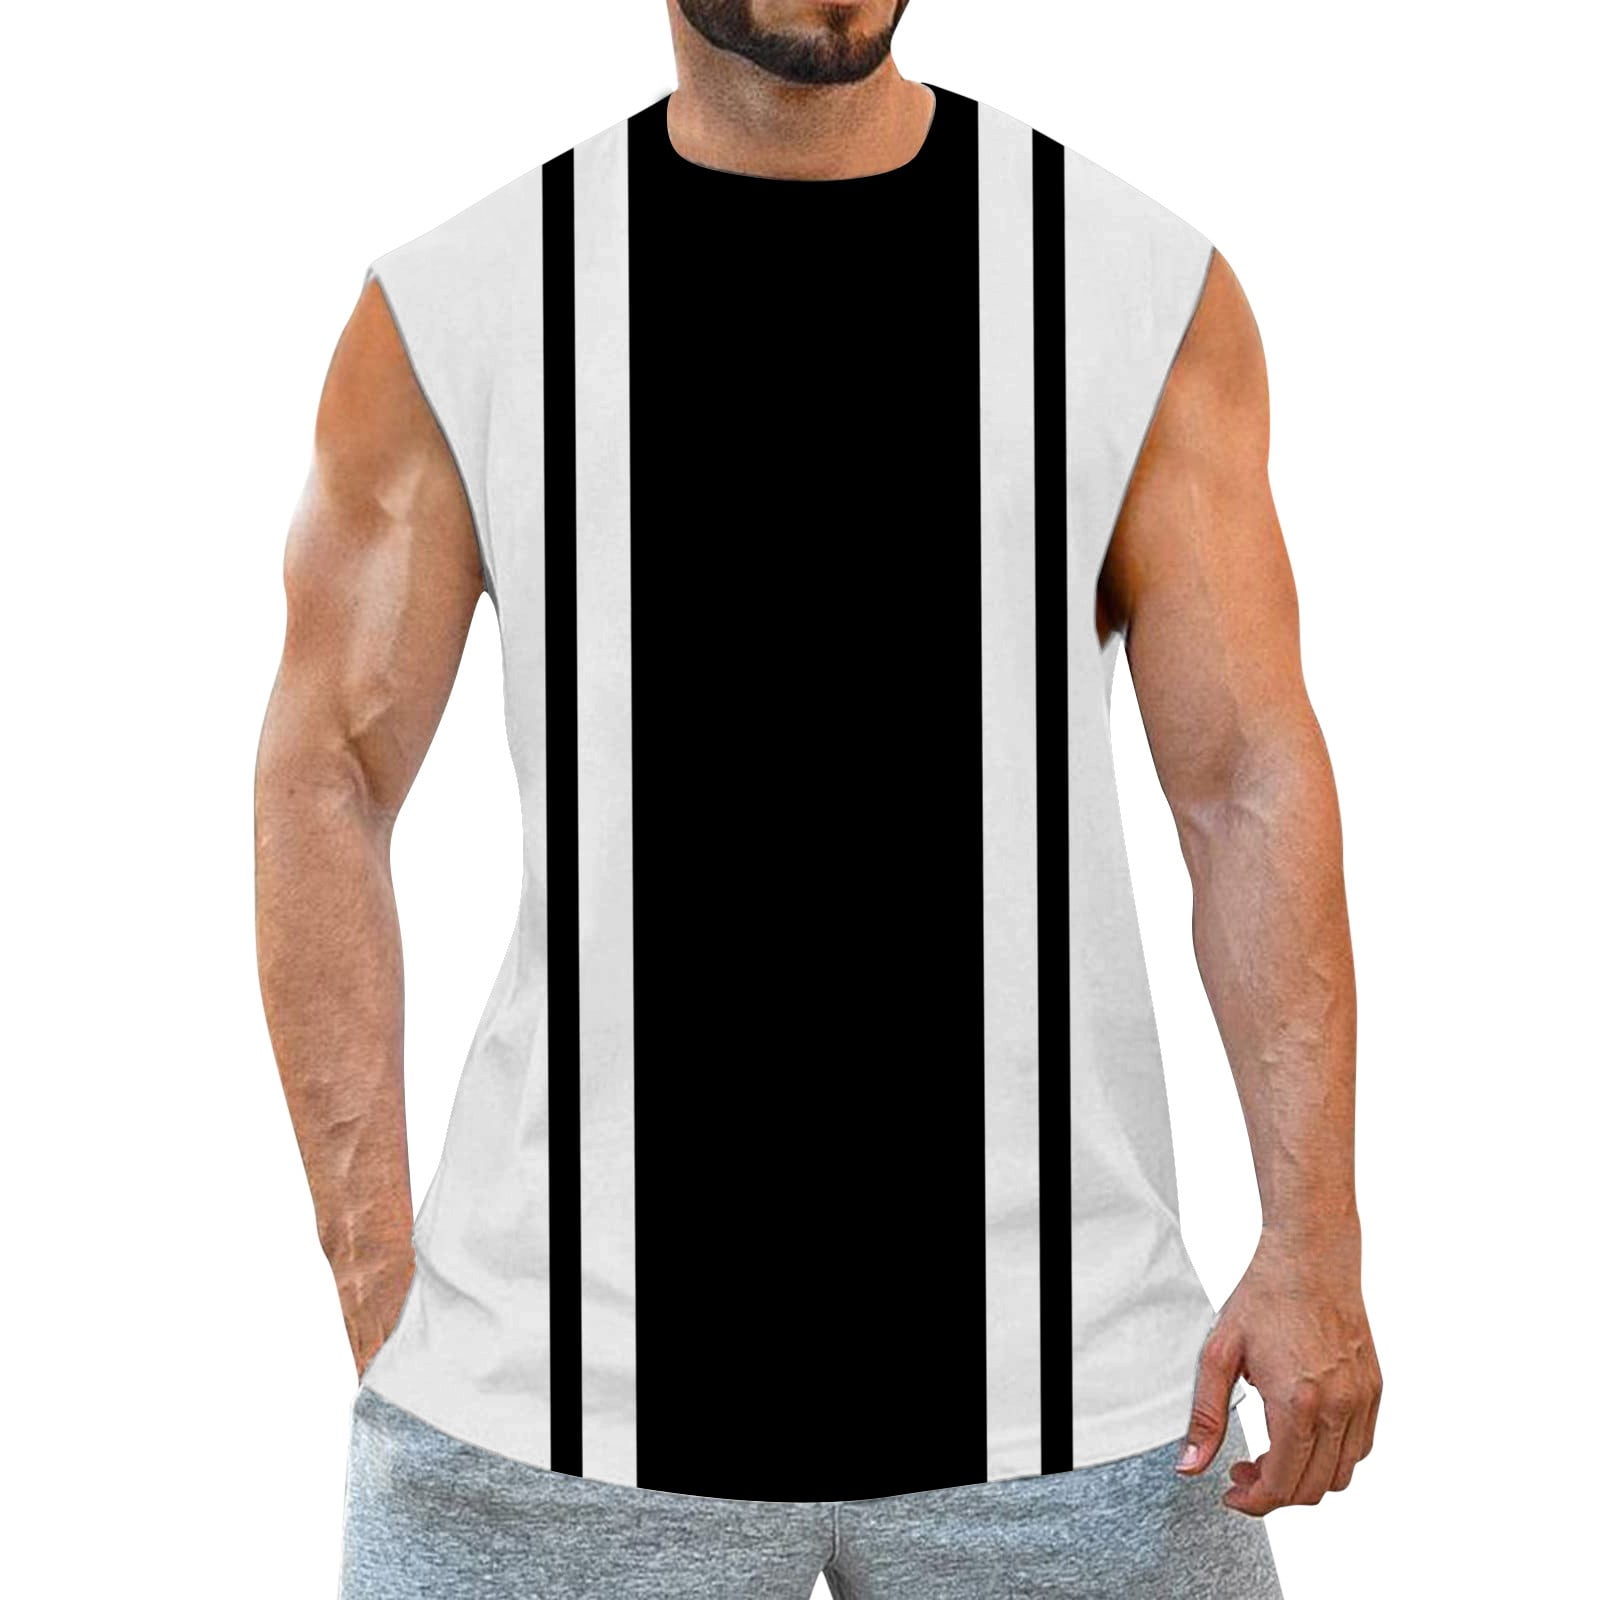 Shirts For Men Big And Tall Men's Workout Hooded Tank Sleeveless Gym Hoodies Muscle Cut Off T-Shirts Black,3XL -